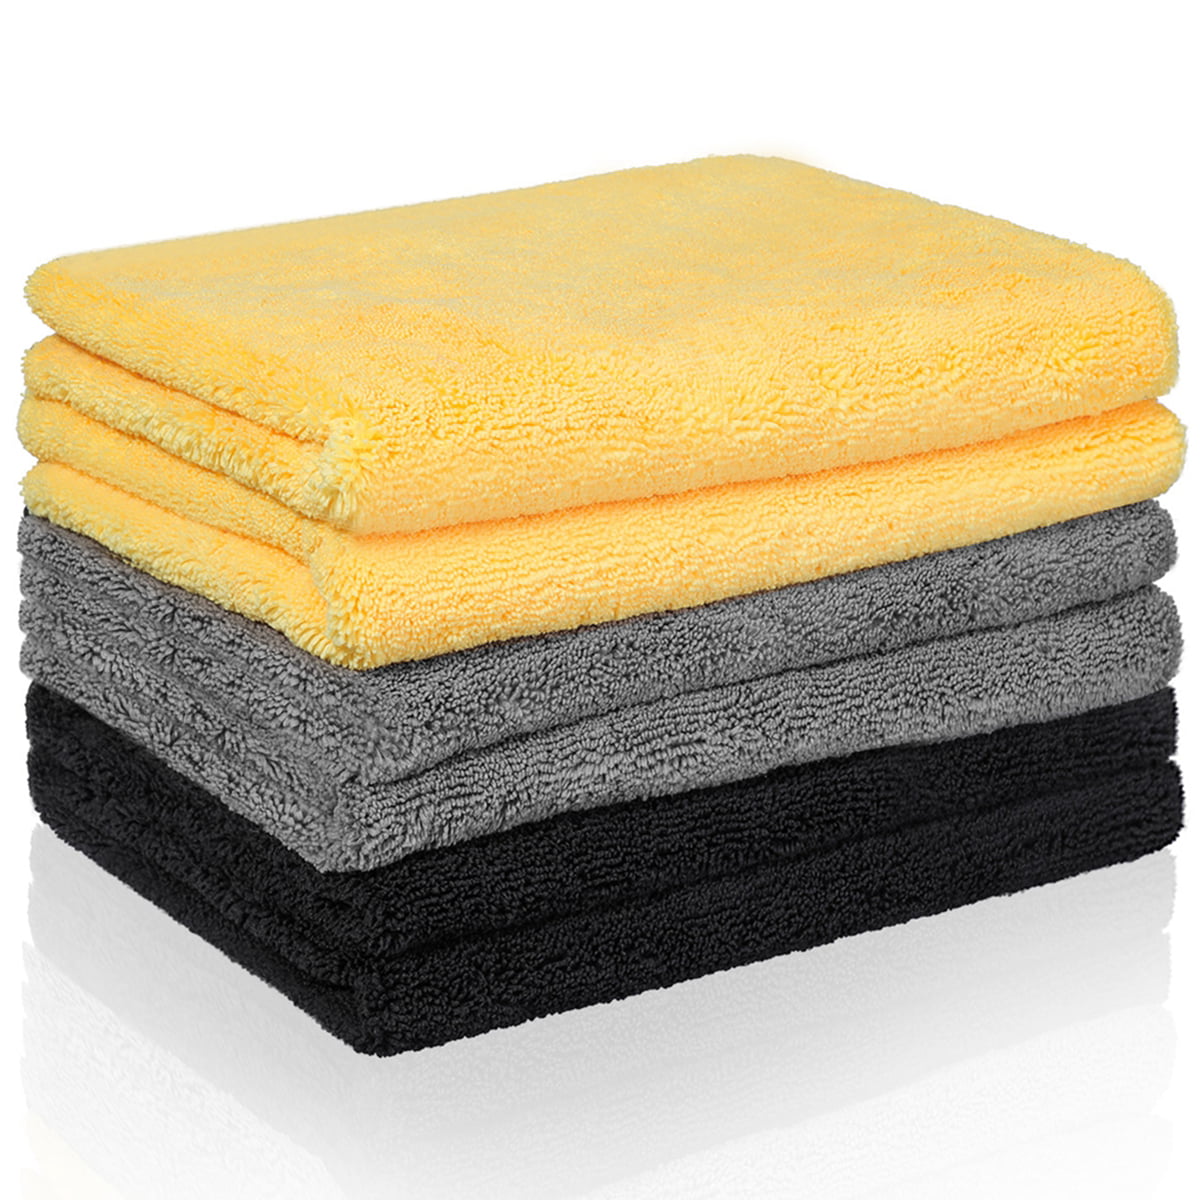 2X Wash Cleaning Drying Cloth Rinse Absorbent Soft Microfiber Towel Universal 